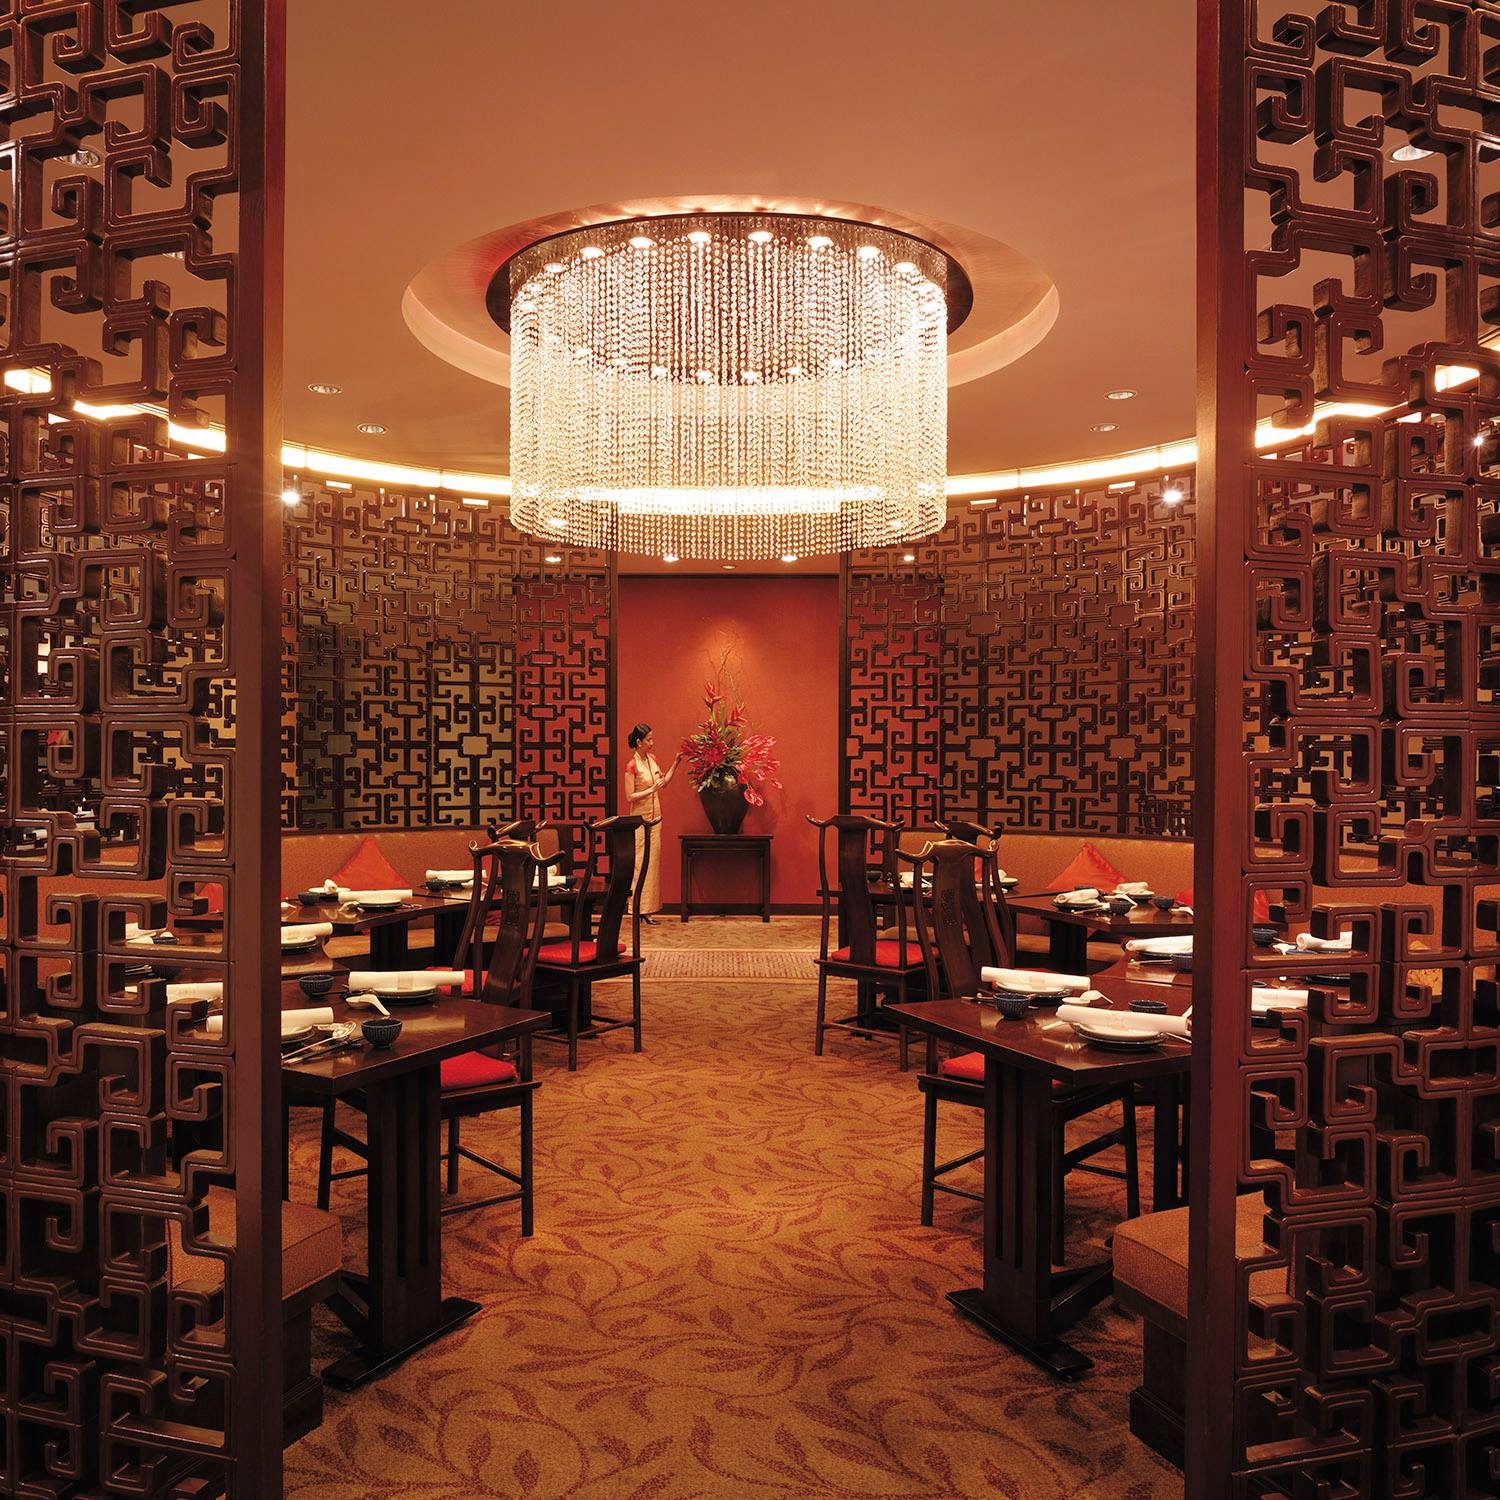 EDSA Shangri-La’s HEAT, Summer Palace reopen for dine-in